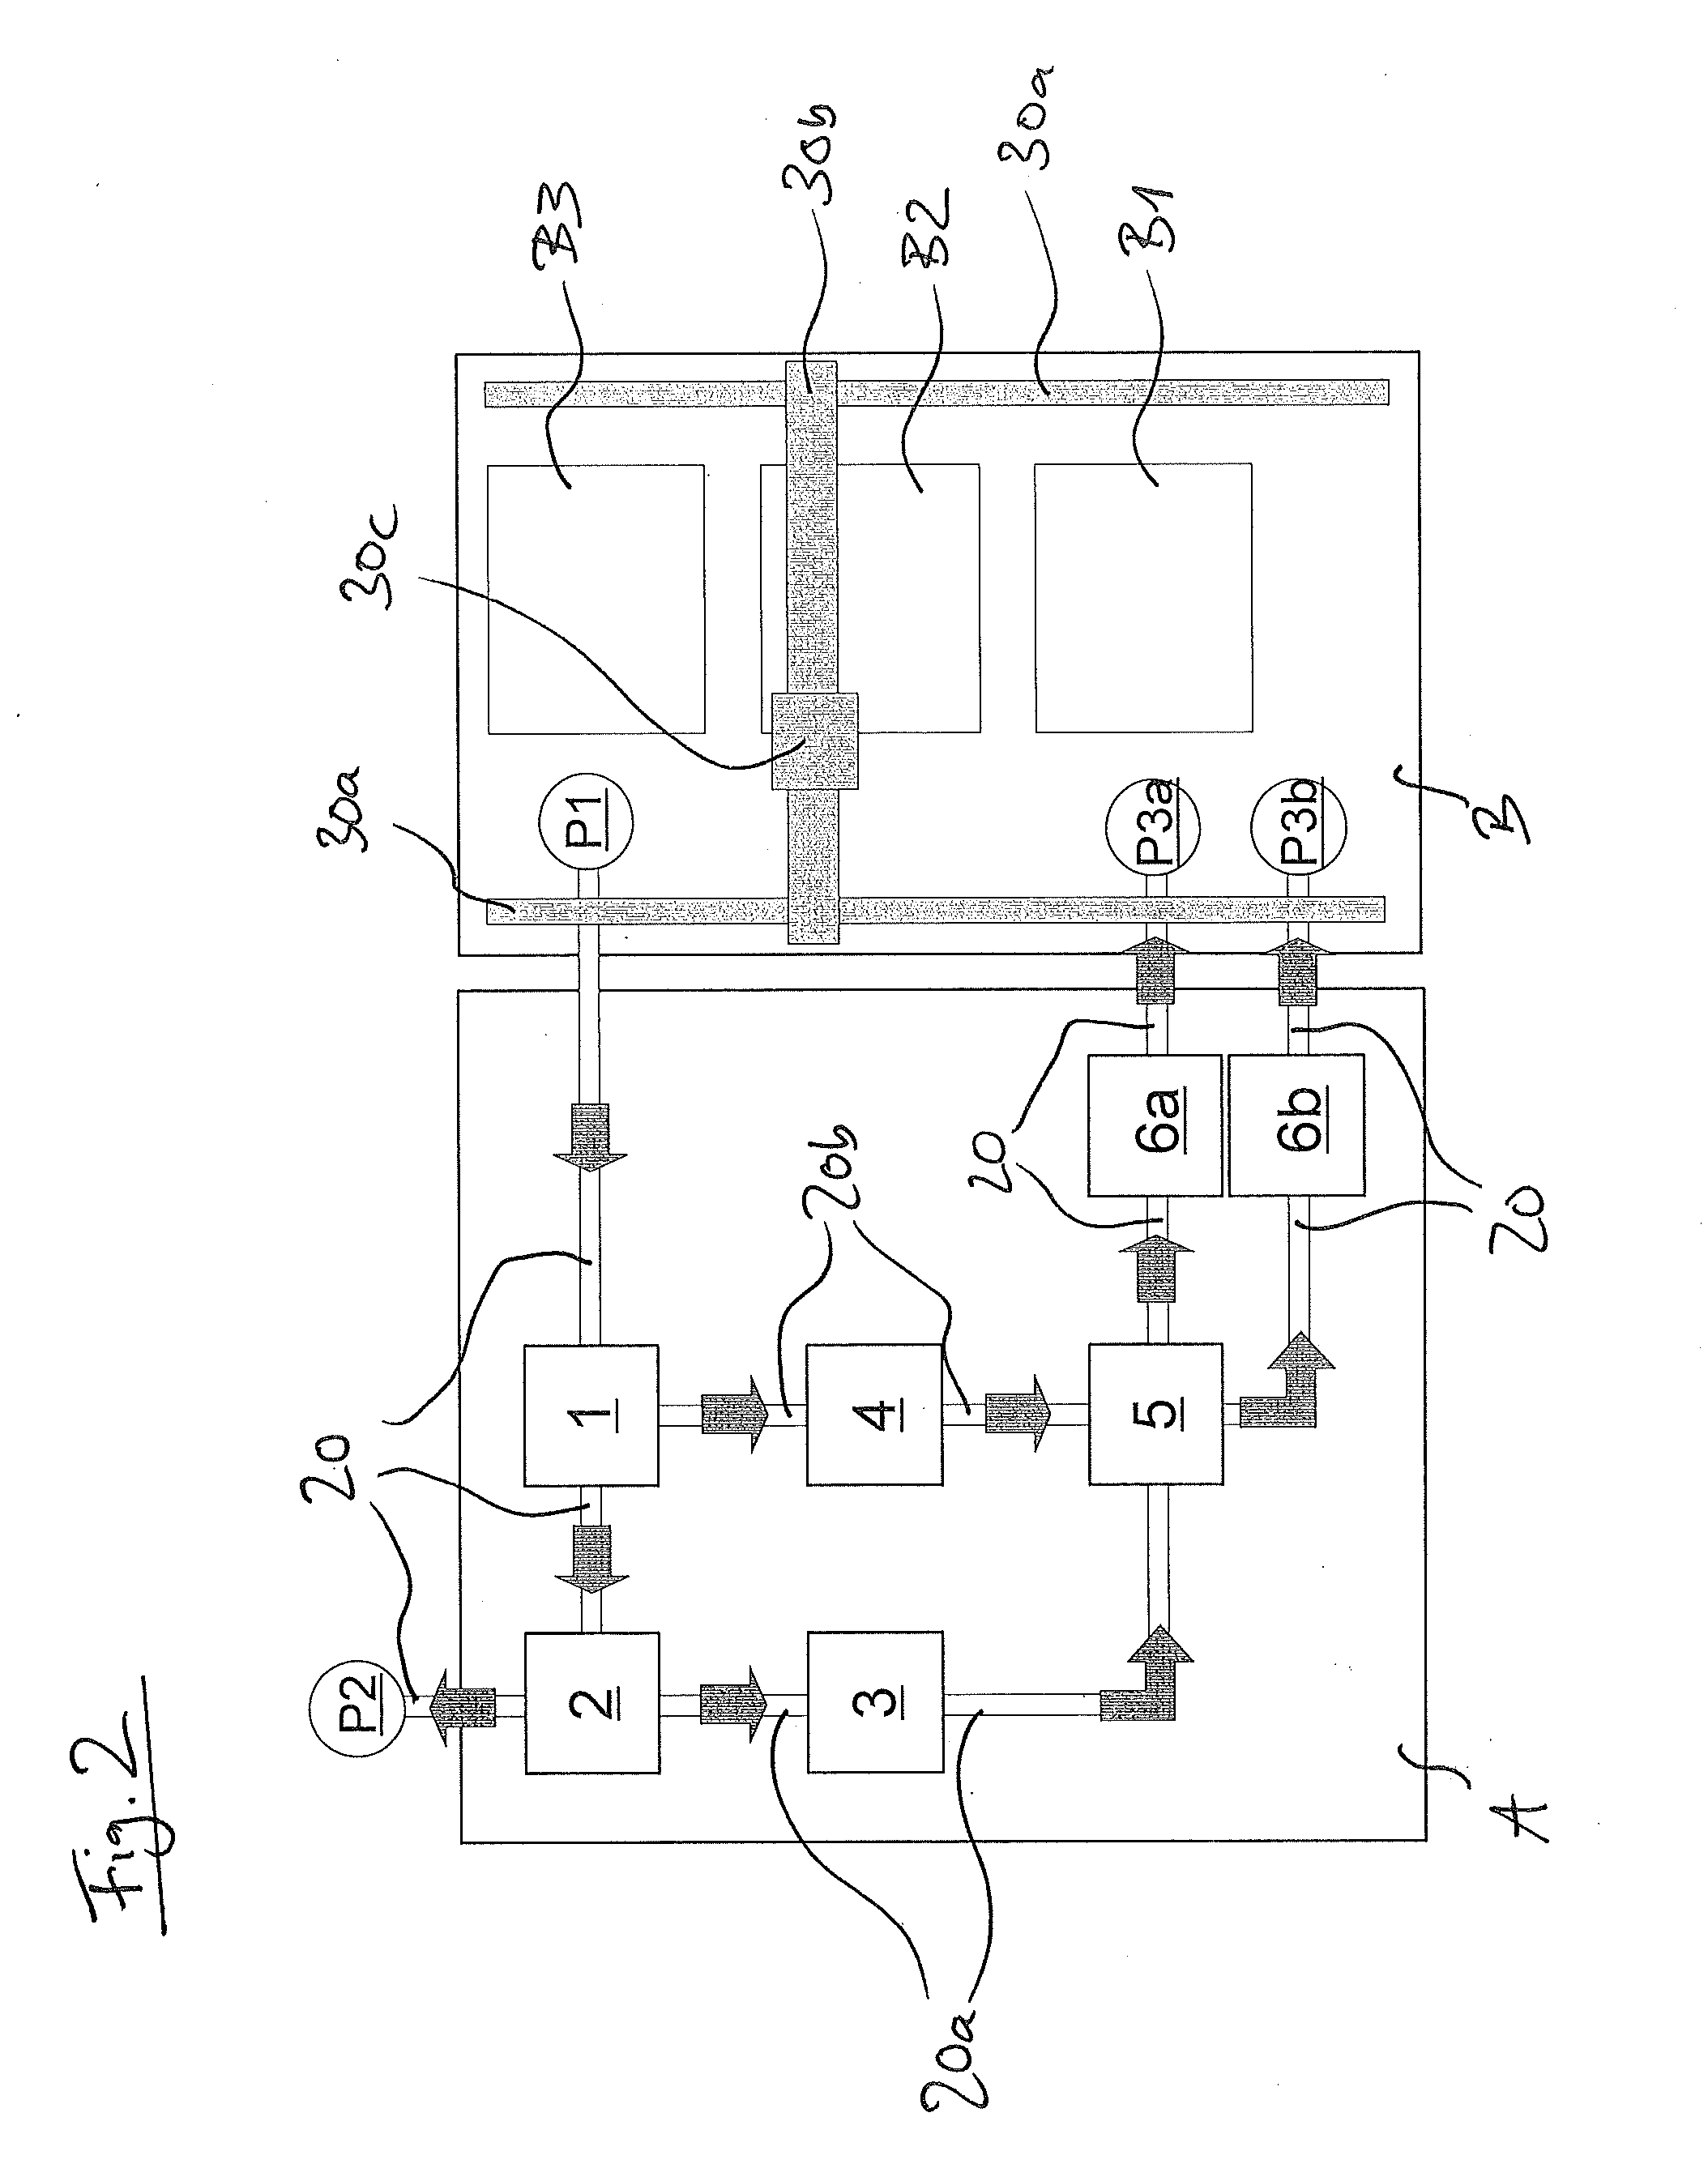 System and Method for Producing Tubular Concrete Products